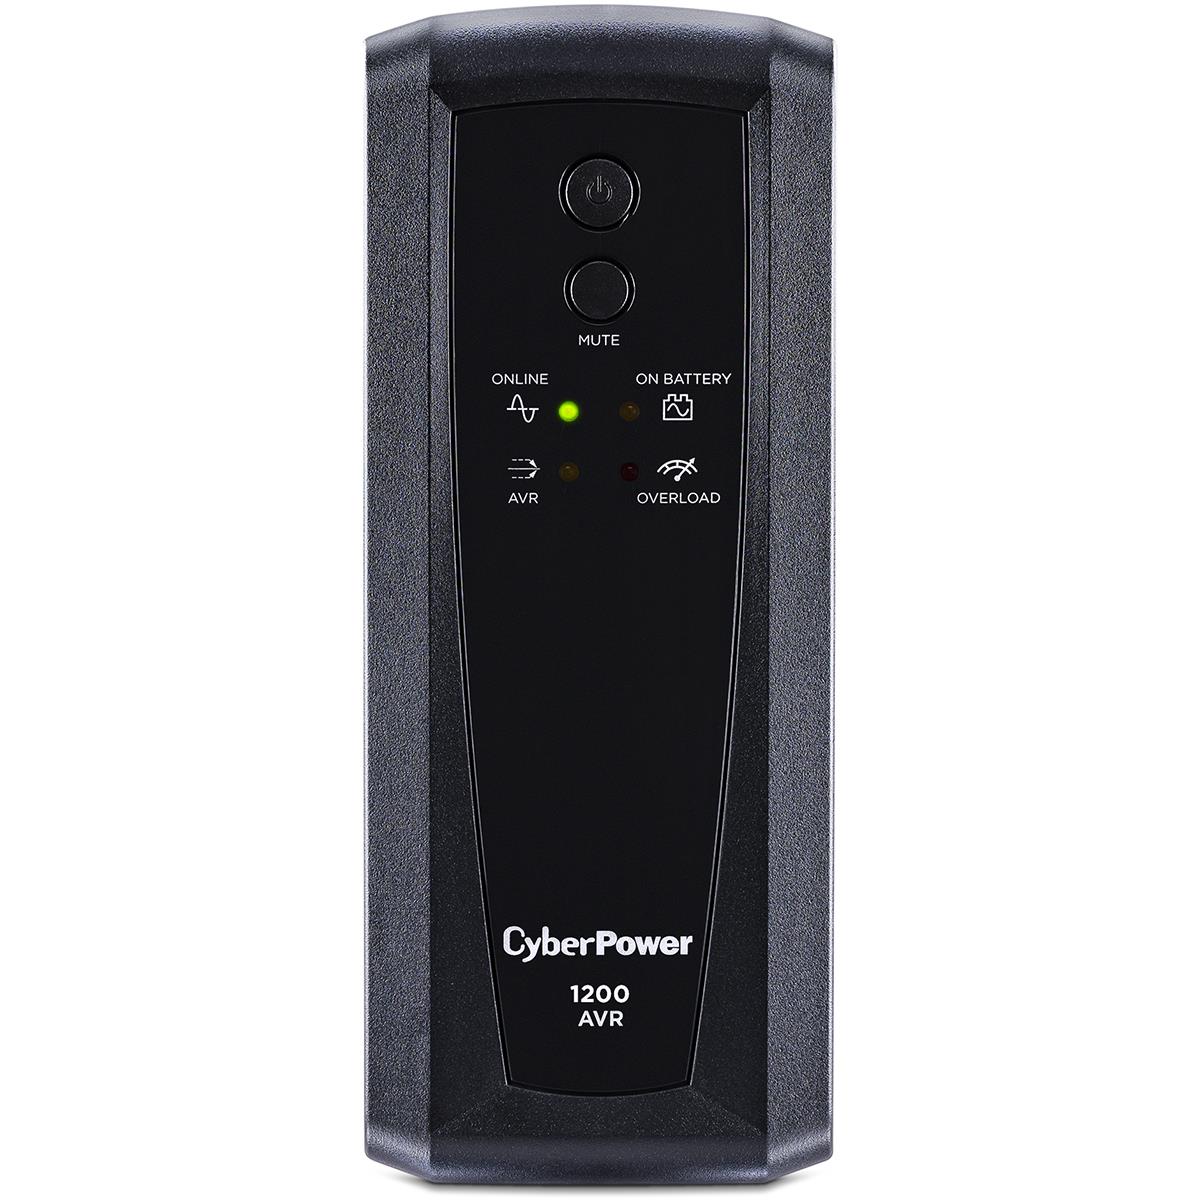 Image of CyberPower AVR Series Computer Battery Backup